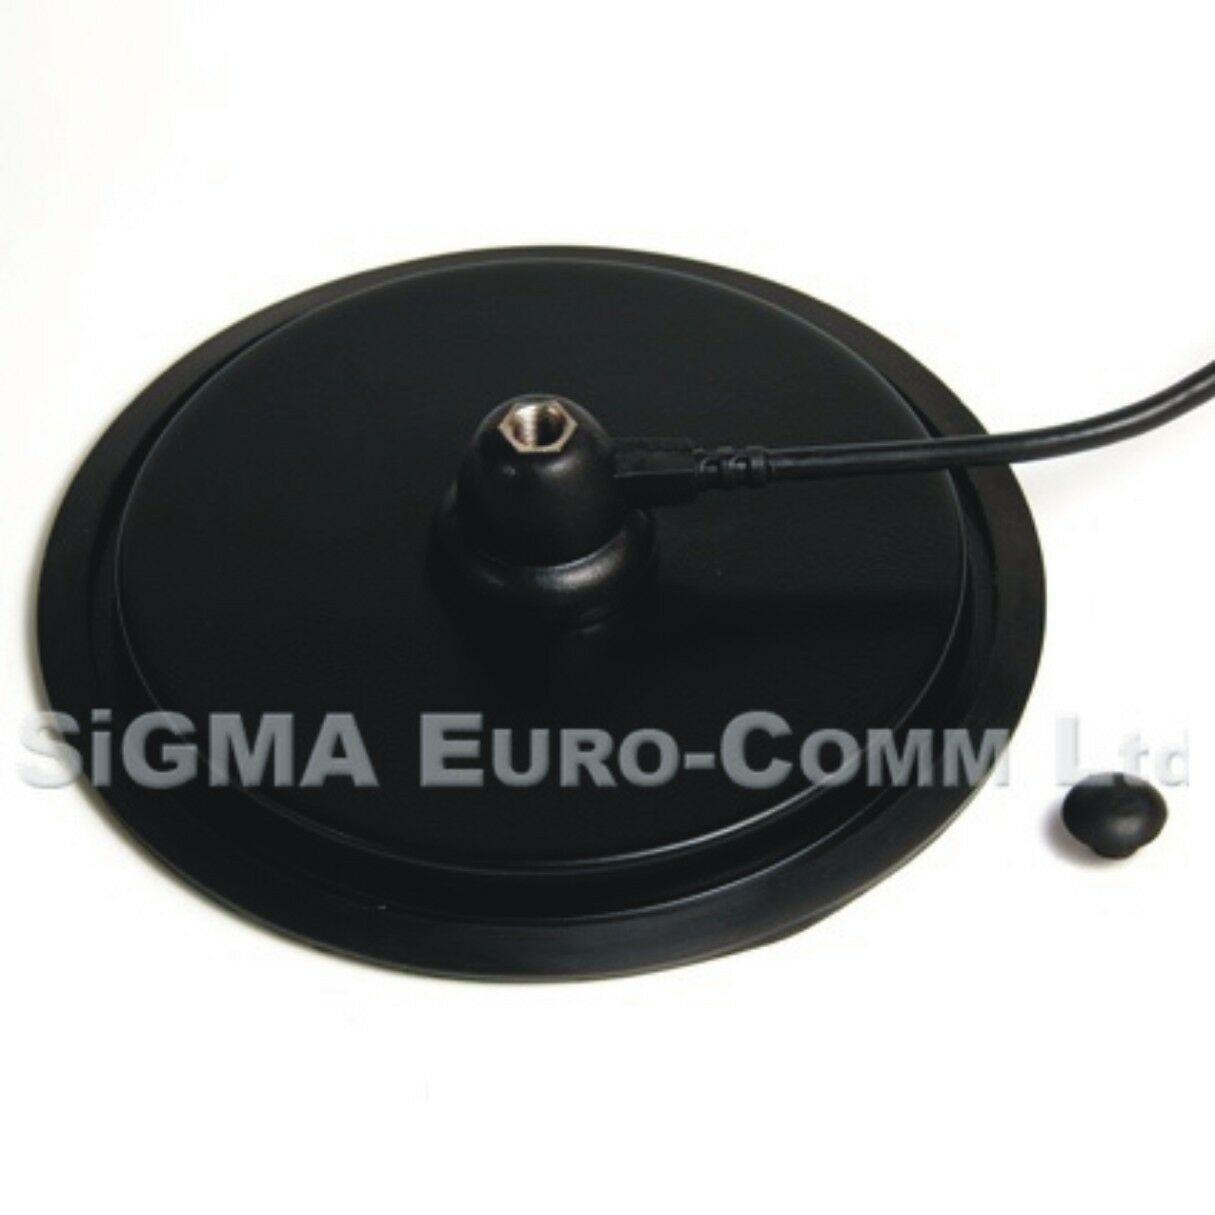 7 " Turbo Magnetic Mount 3/8 Fitting Rubber PAD for CB & HAM Radio